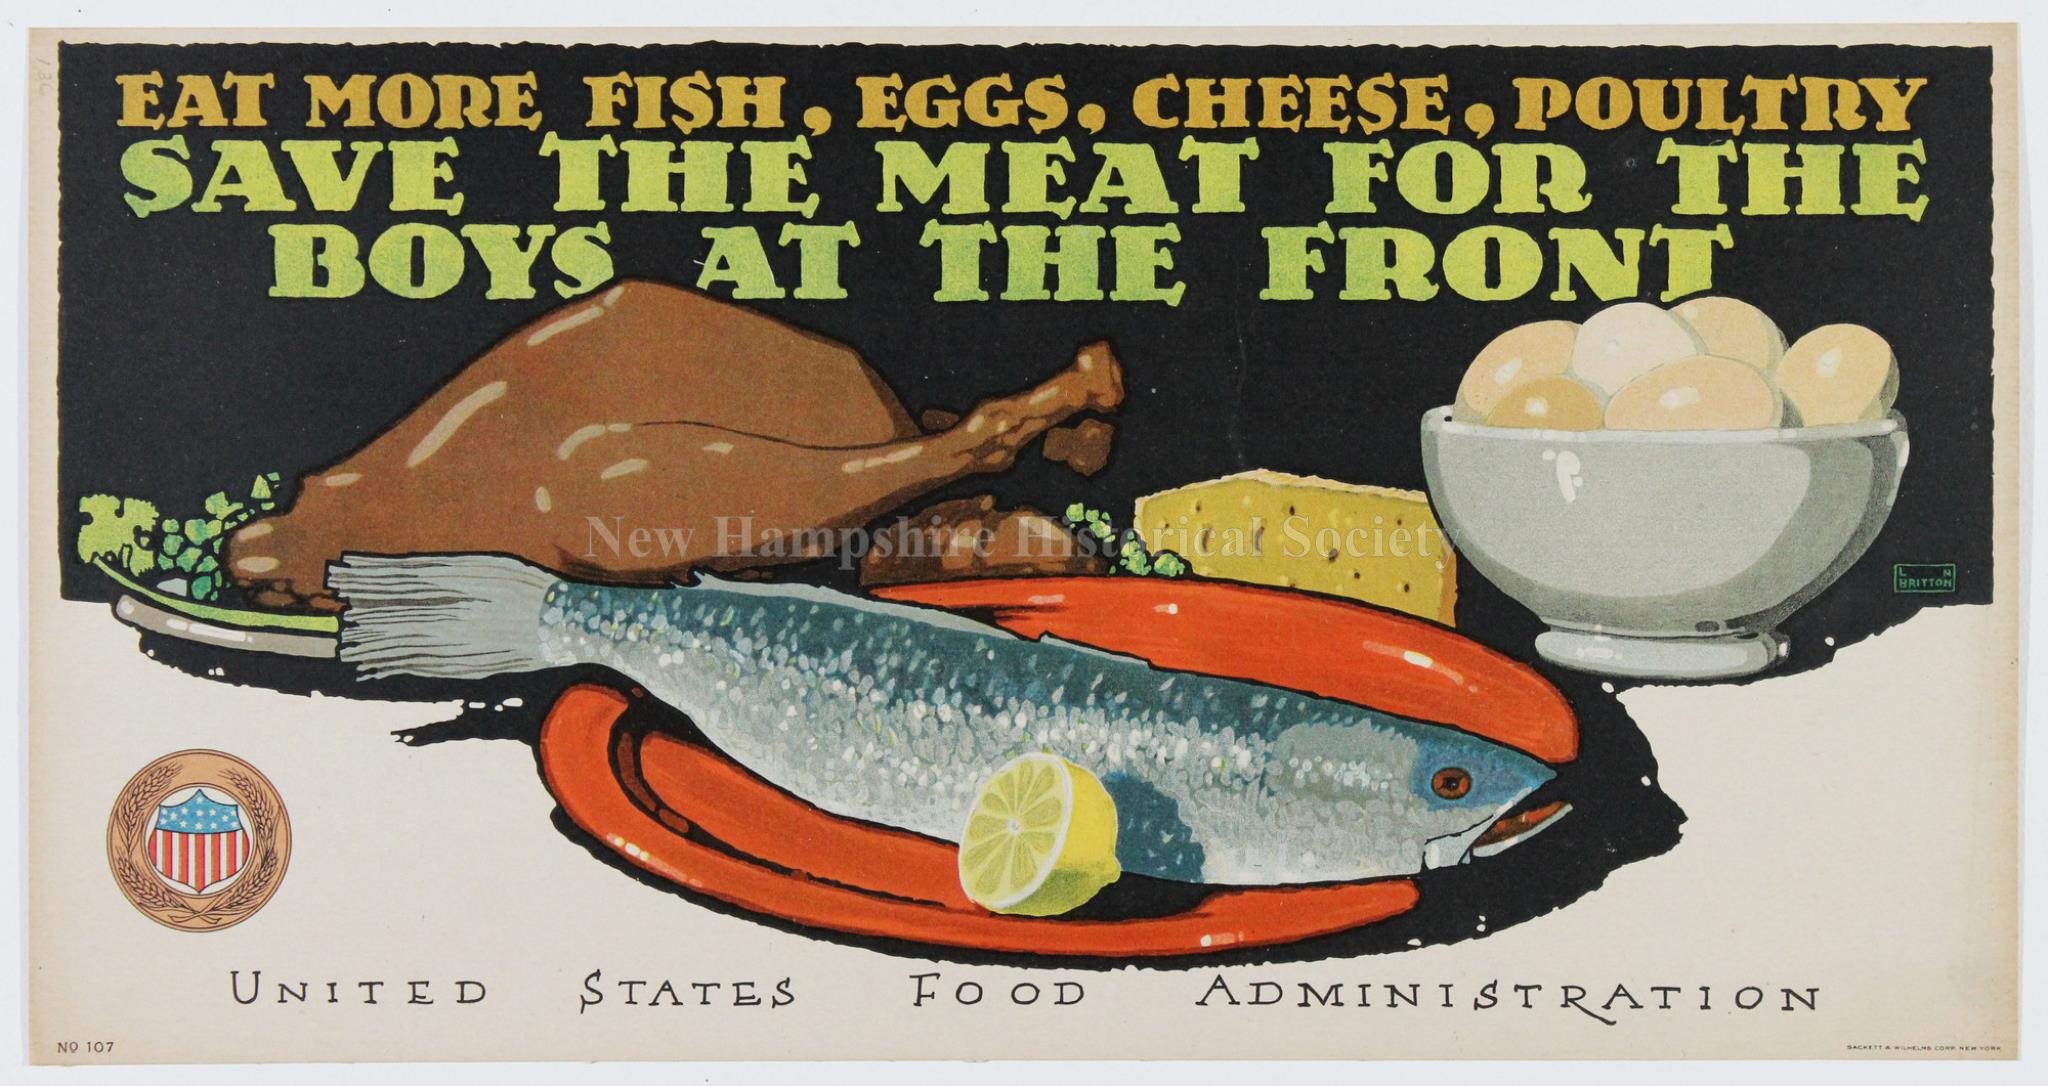 New Hampshire Historical Society - Eat more fish, eggs, cheese, poultry, save  the meat for the boys at the front, undated [approximately 1917] - Eat more  fish, eggs, cheese, poultry, save the